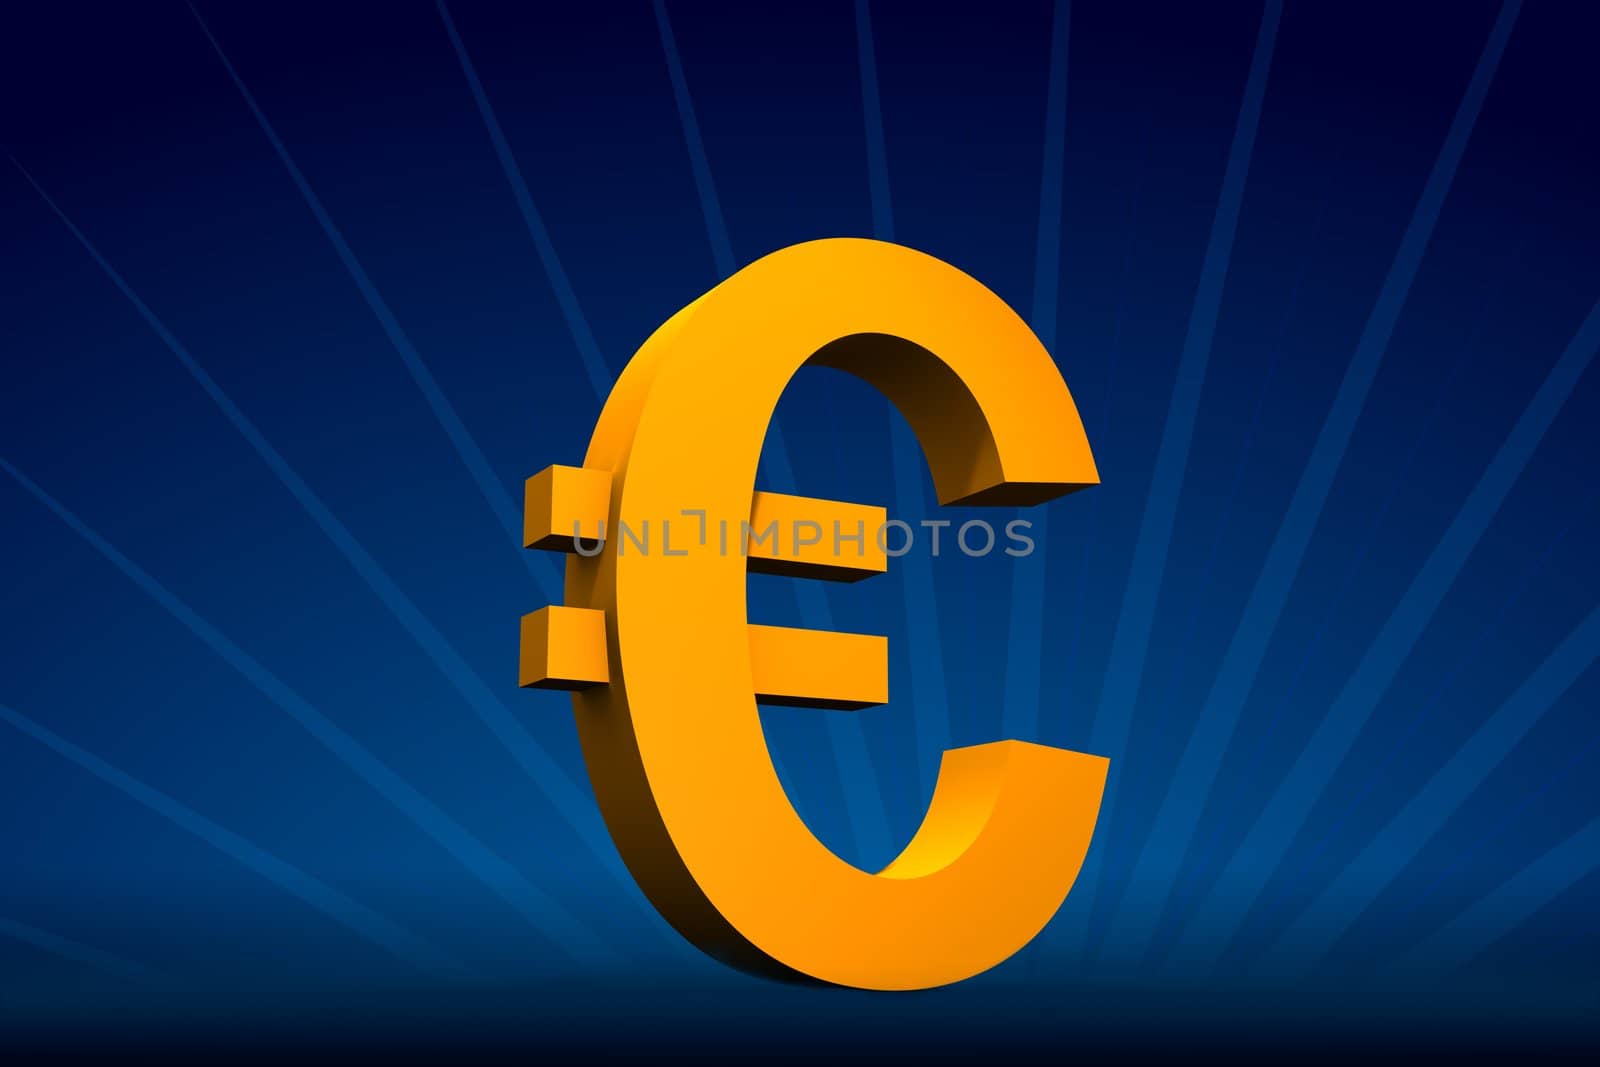 Rendered yellow Euro symbol on dark-blue with rays on back